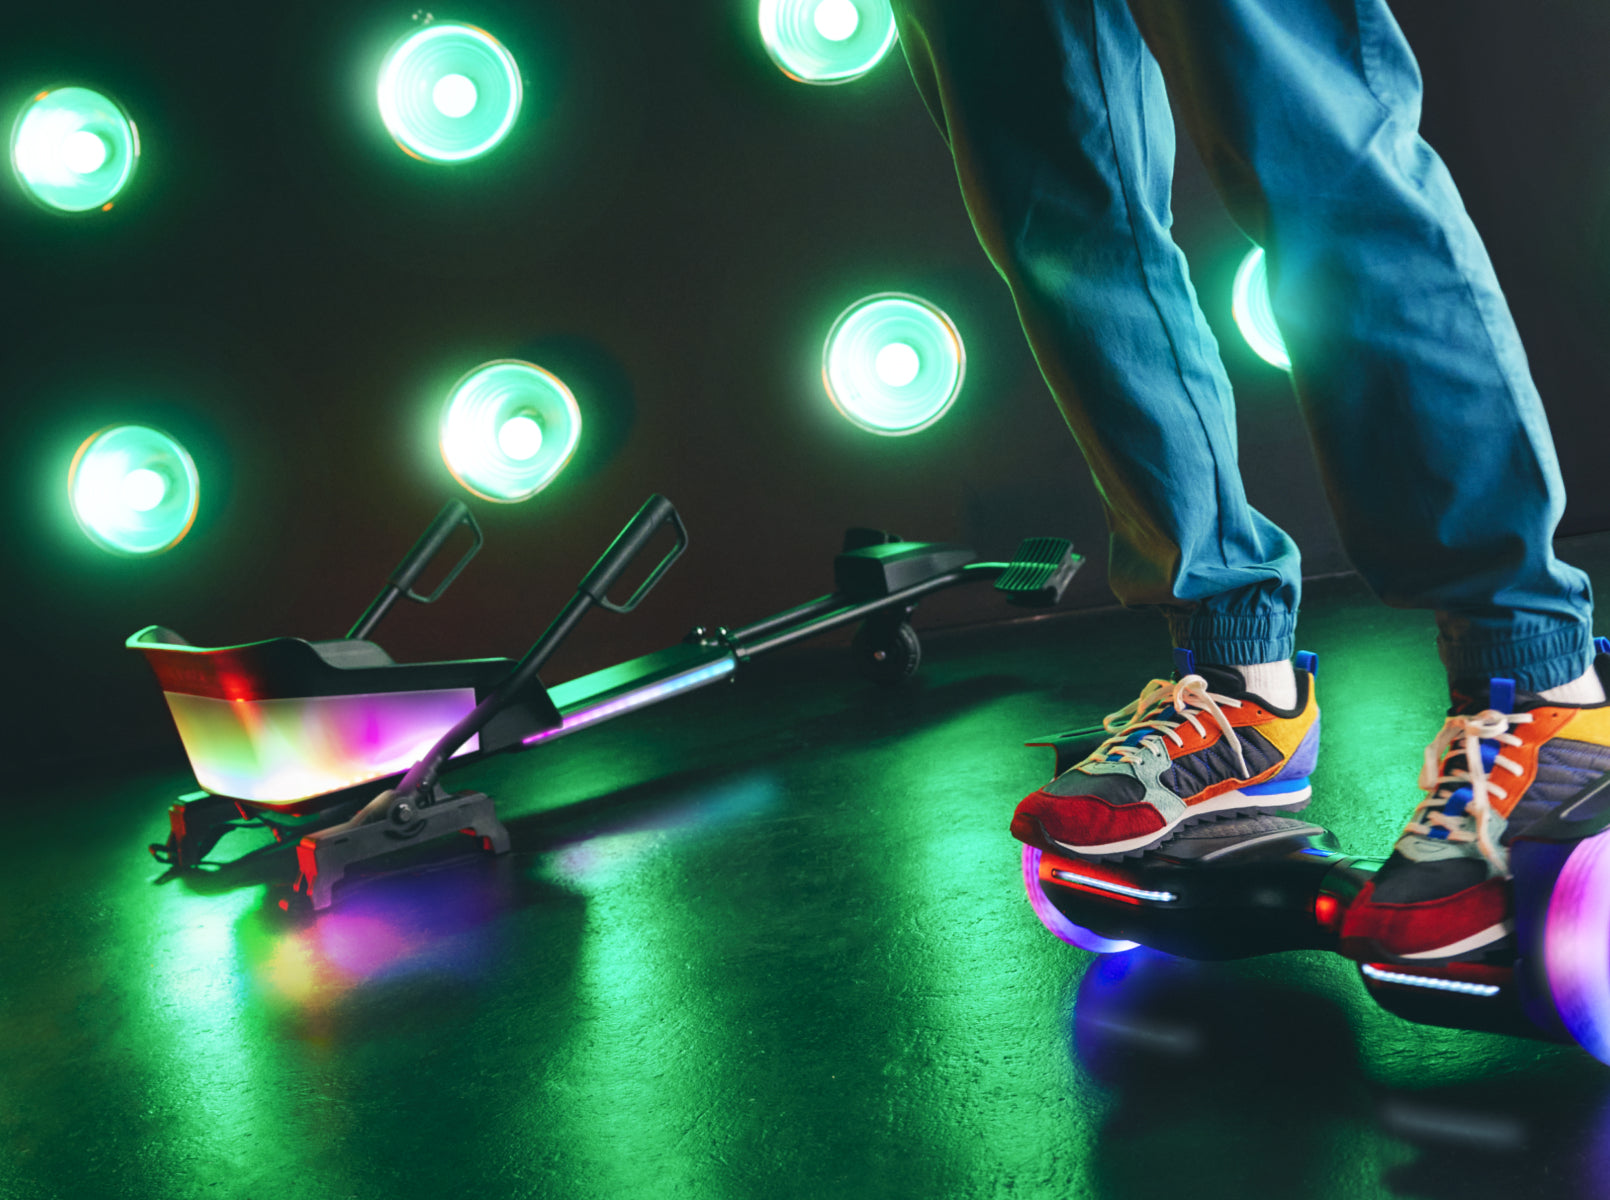 Jetson Remix Light-Up Hoverboard and Go-Kart Combo